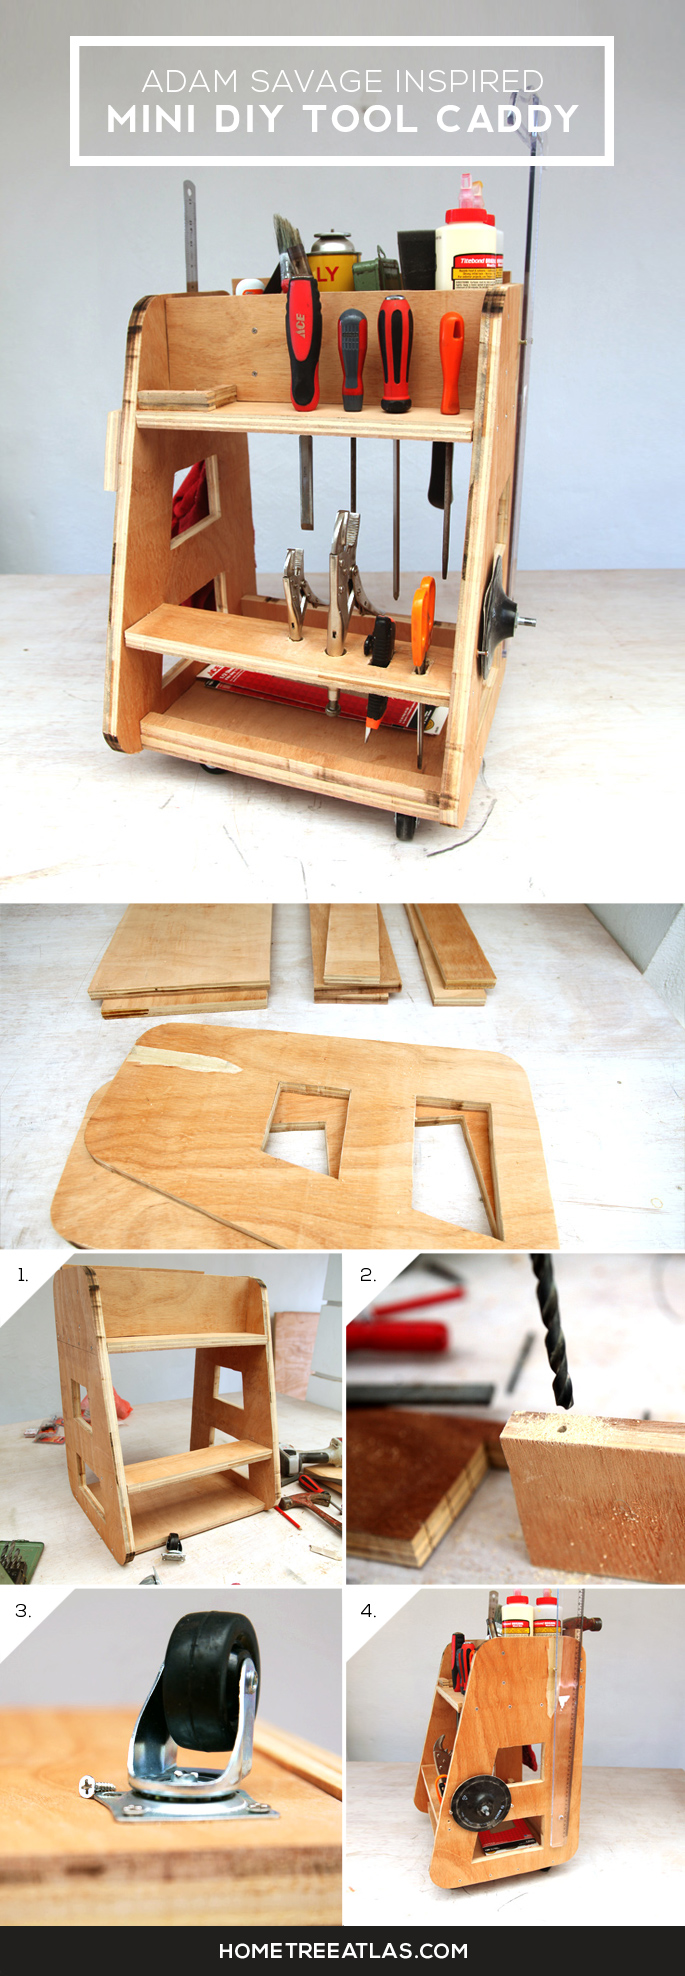 DIY Tool Caddy Inspired By Adam Savage From Mythbusters